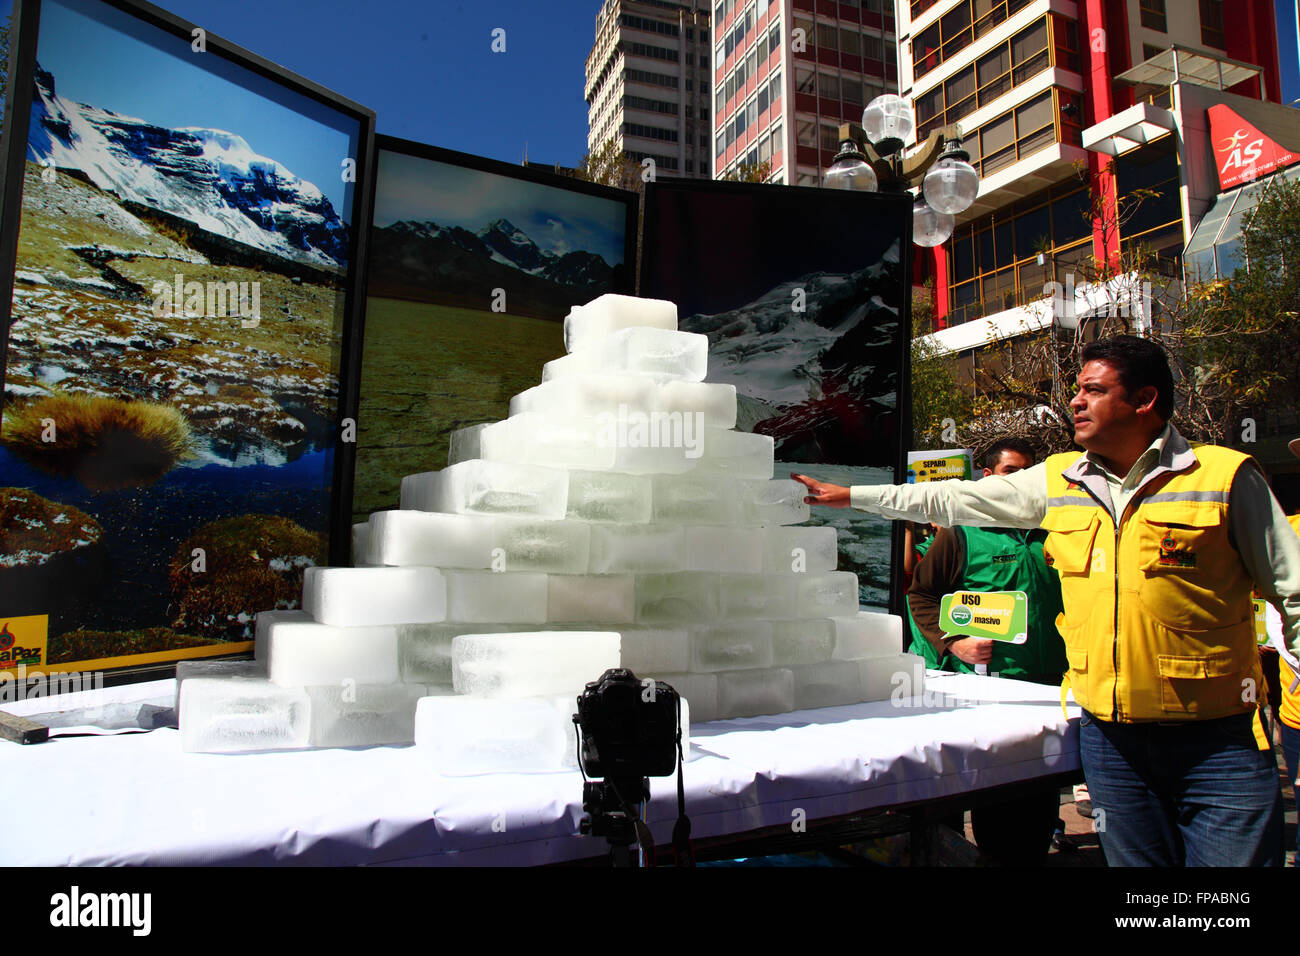 La Paz, Bolivia, 18th March 2016. The mayor of La Paz Luis Revilla stands next to blocks of ice as they slowly melt in front of photos of Bolivia's mountains at an event organised by the La Paz City Government. The glaciers in Bolivia and the central Andes are some of the fastest receding on the planet, and their disappearance is causing environmental changes and water shortages in many parts of the region. Credit:  James Brunker / Alamy Live News Stock Photo